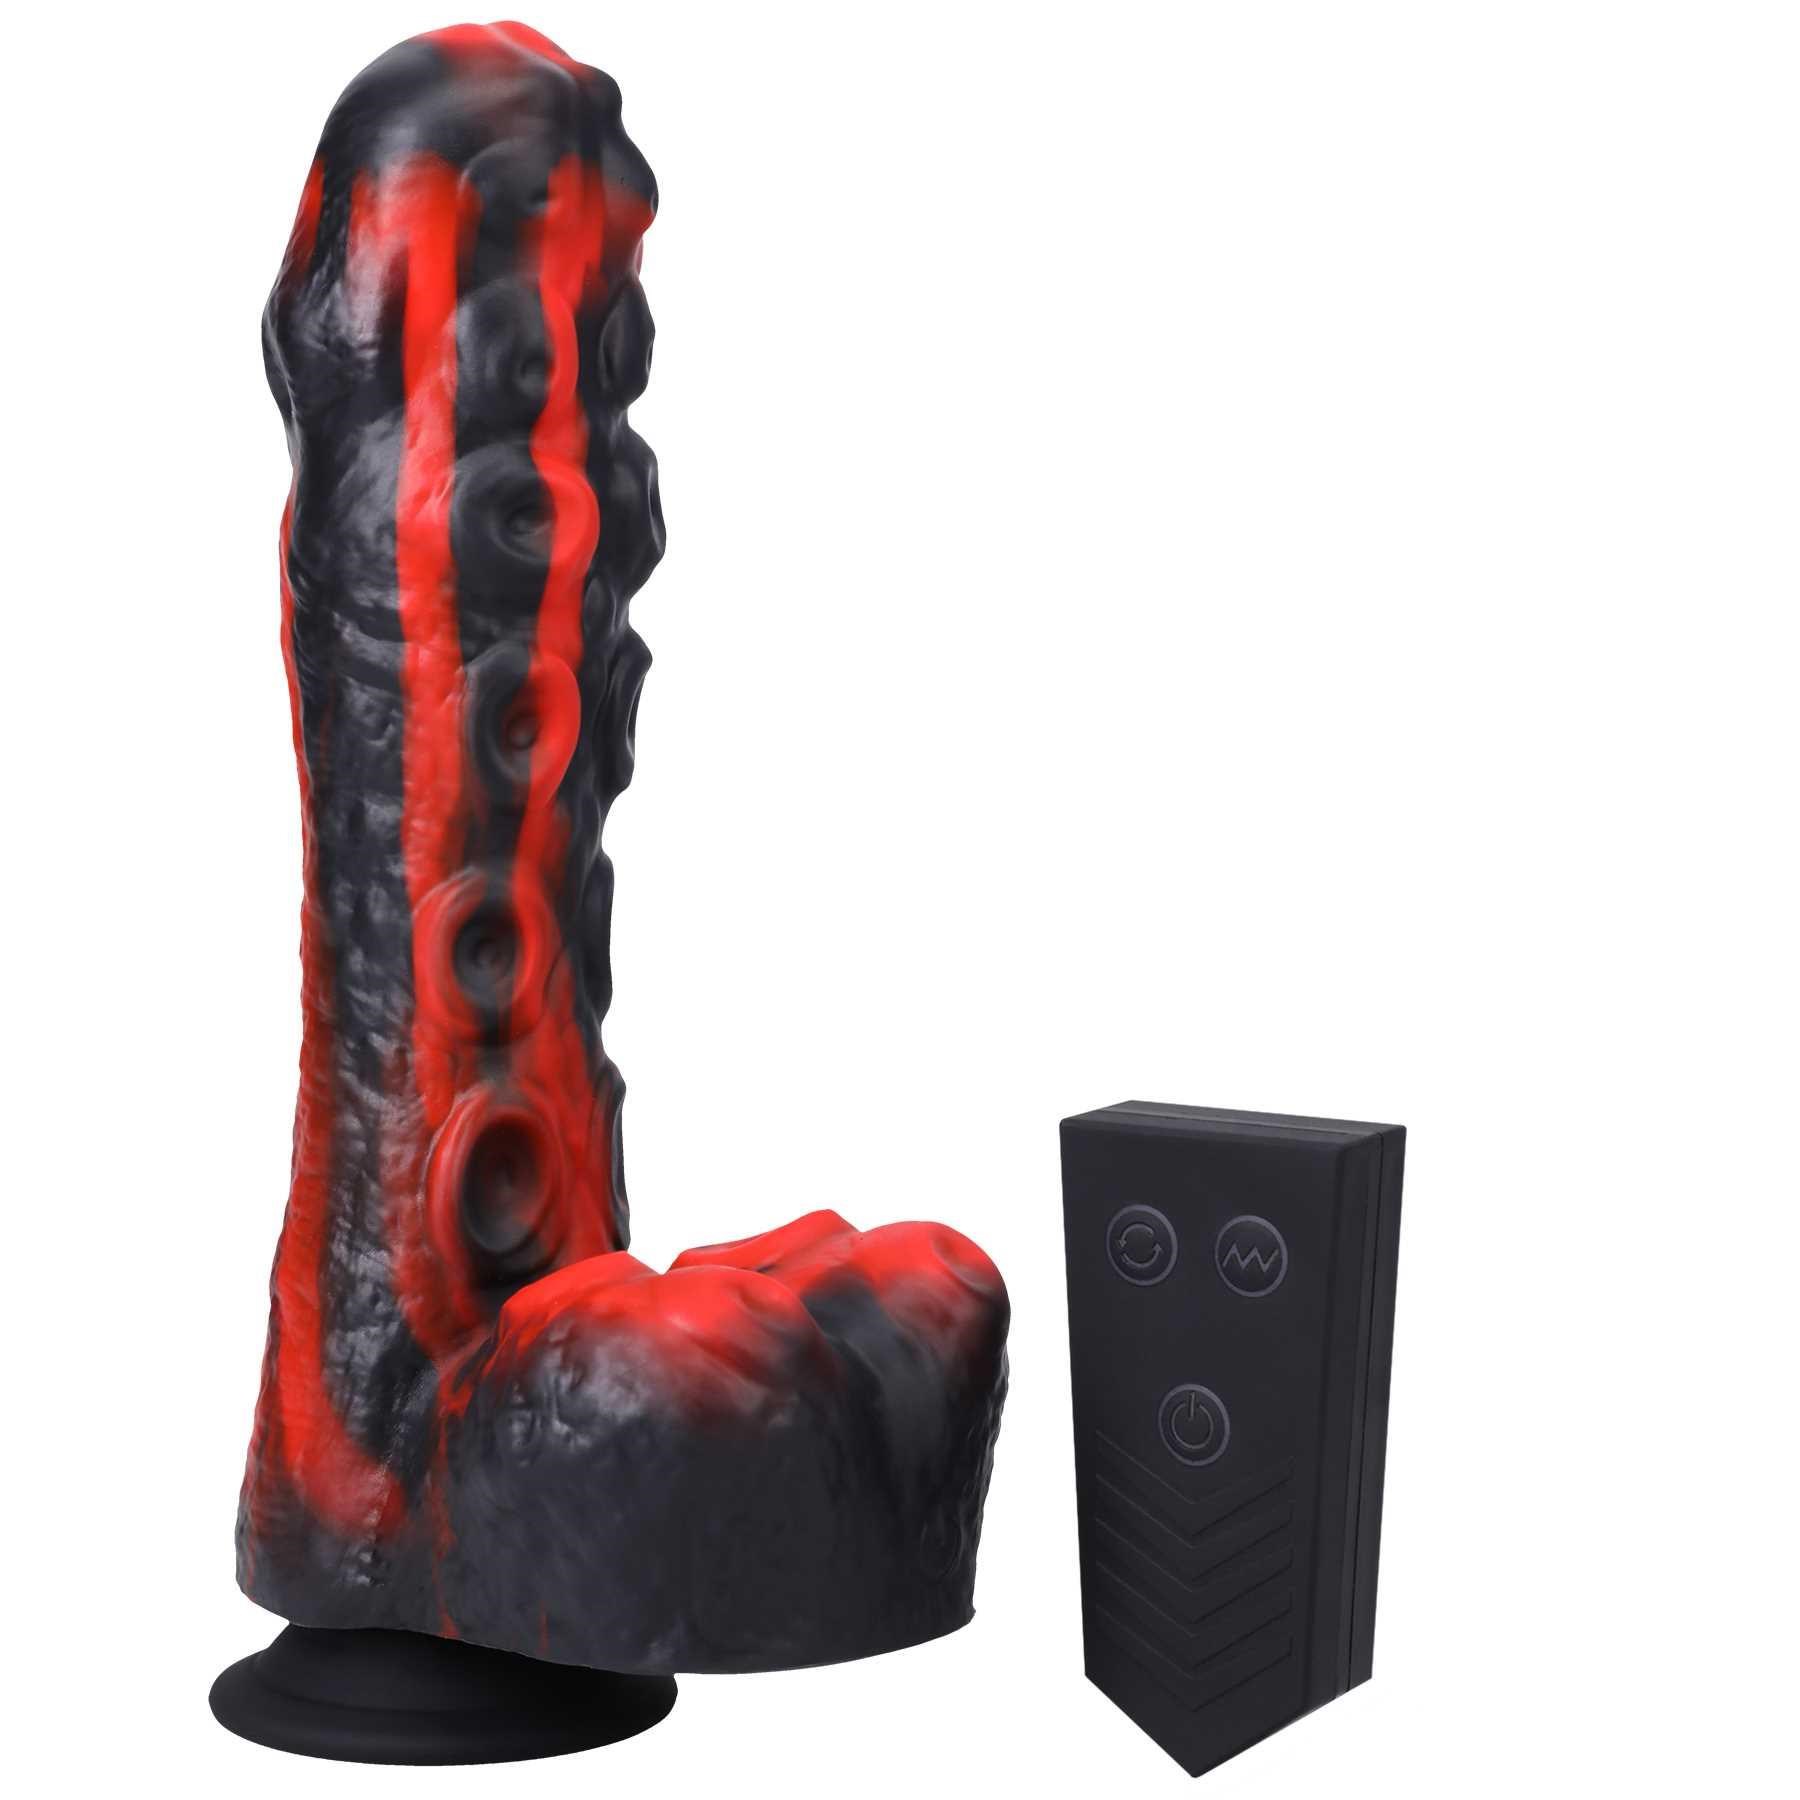 Fort Troff Tendril Thruster Mini F*ck Machine - Product and Remote red